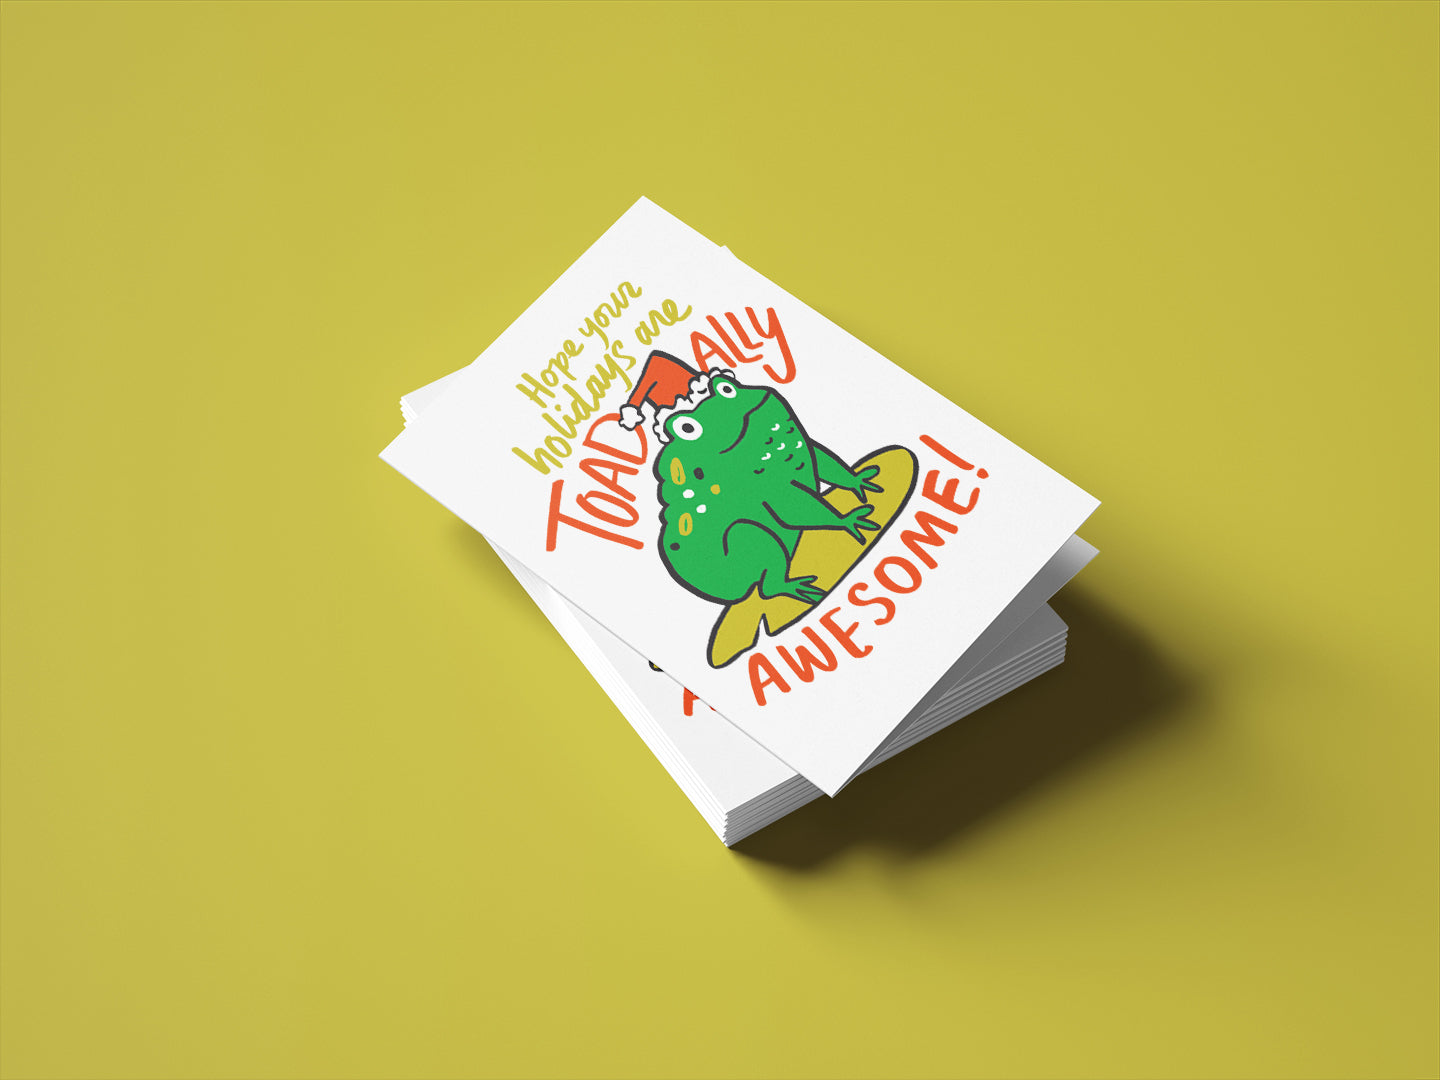 Toad-ally Awesome Holiday Card